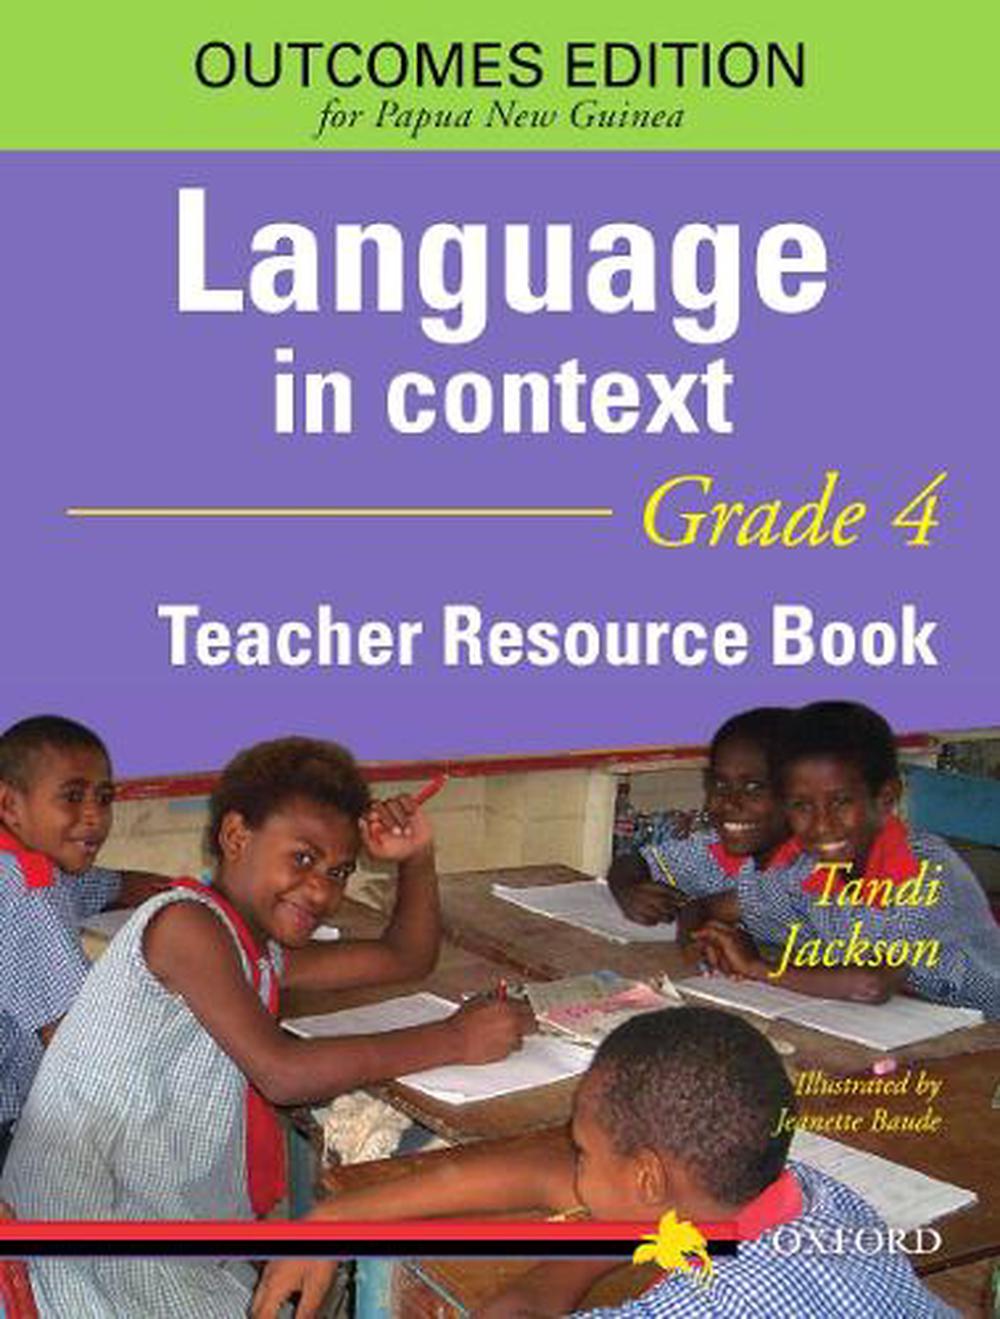 Guinea　Grade　9780195560633　Jackson,　The　online　Papua　Tandi　Book　Buy　In　Teacher　at　New　Language　by　Paperback,　Context　Resource　Nile